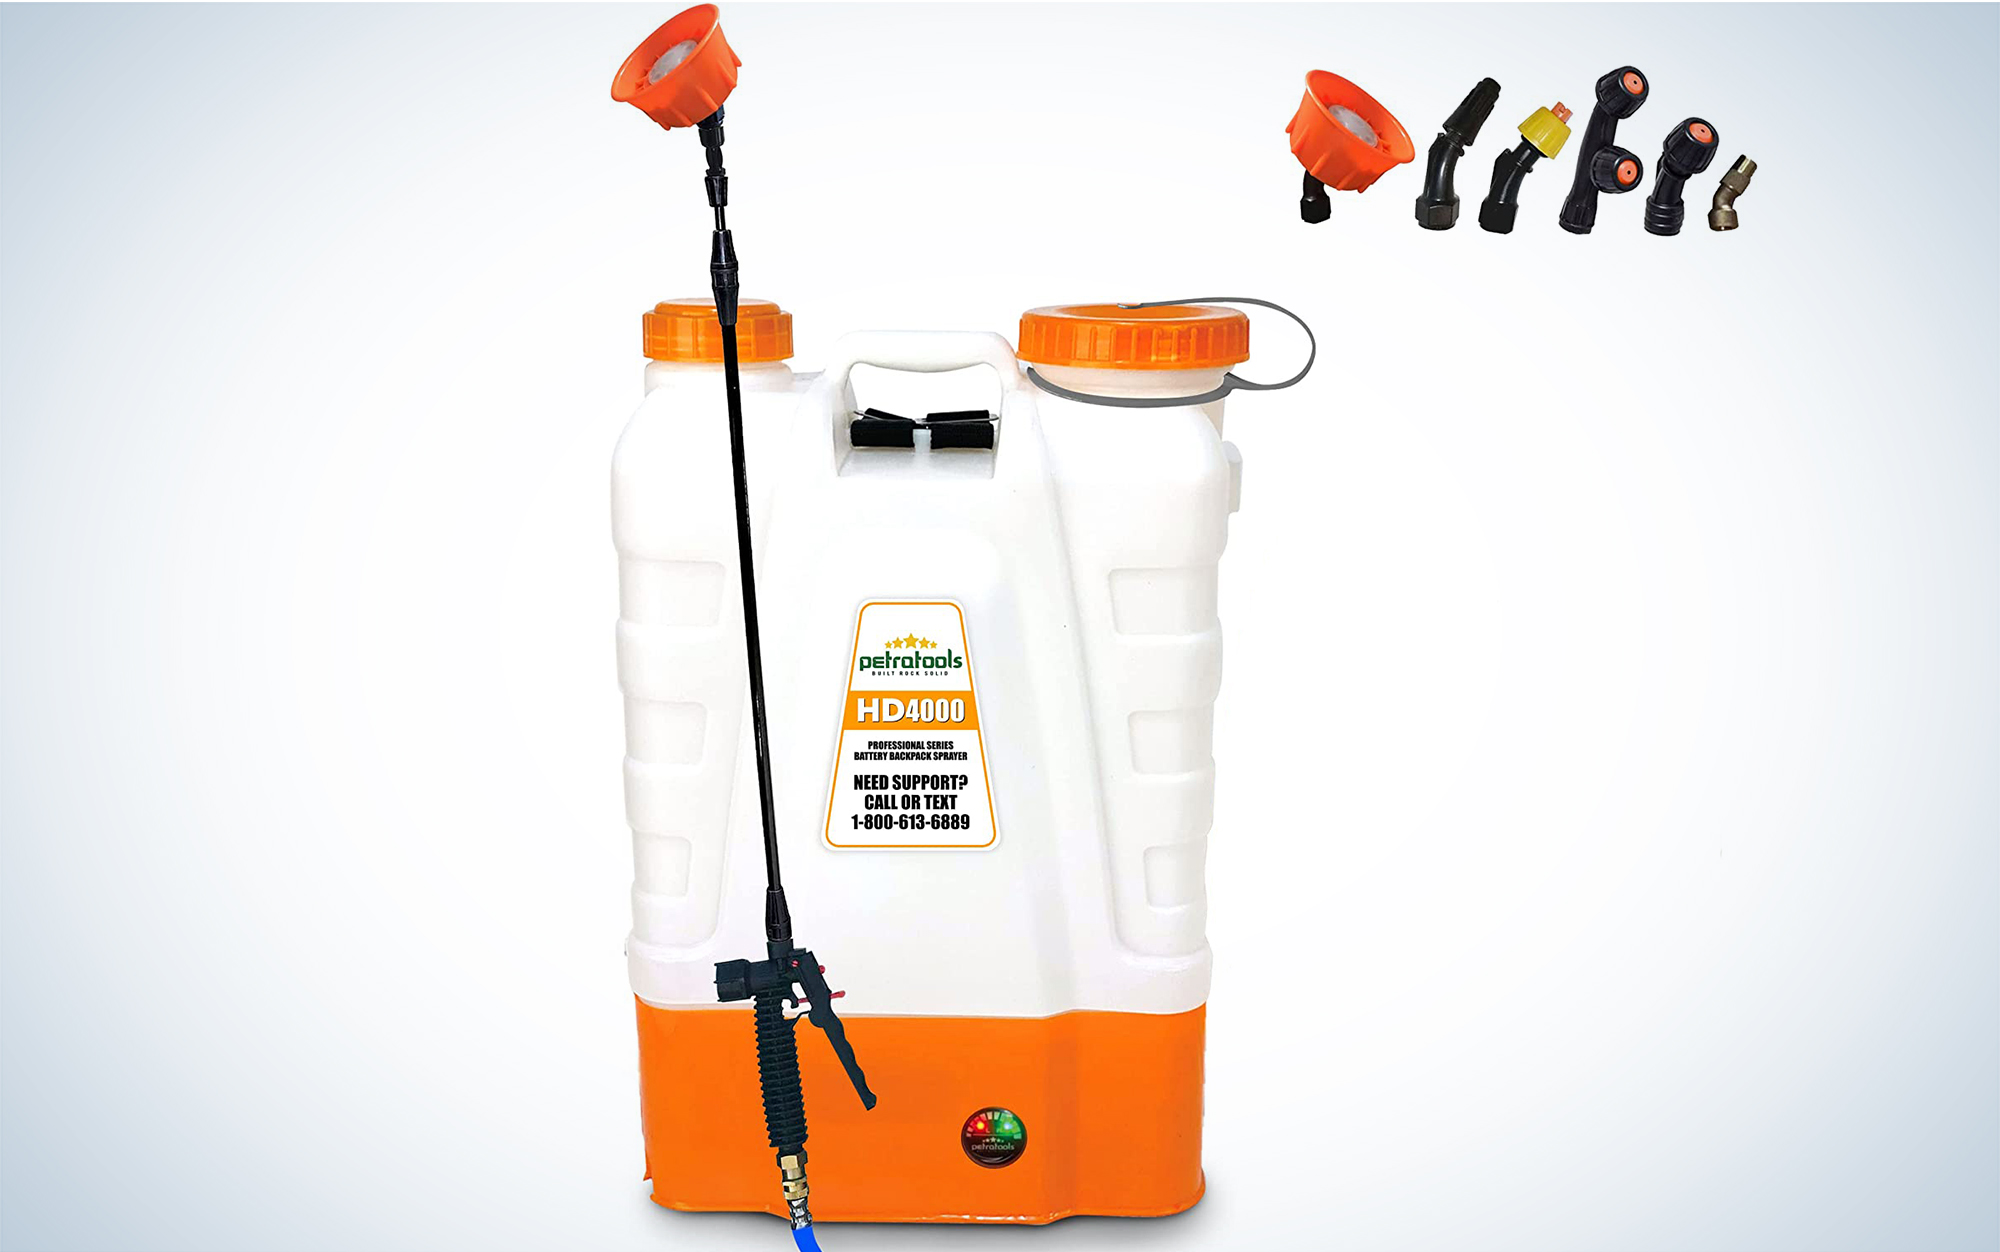 Tomahawk Power 5 gal. GAS Power Backpack Sprayer with Twin Tip Nozzle for Pesticide, Disinfectant and Fertilizer